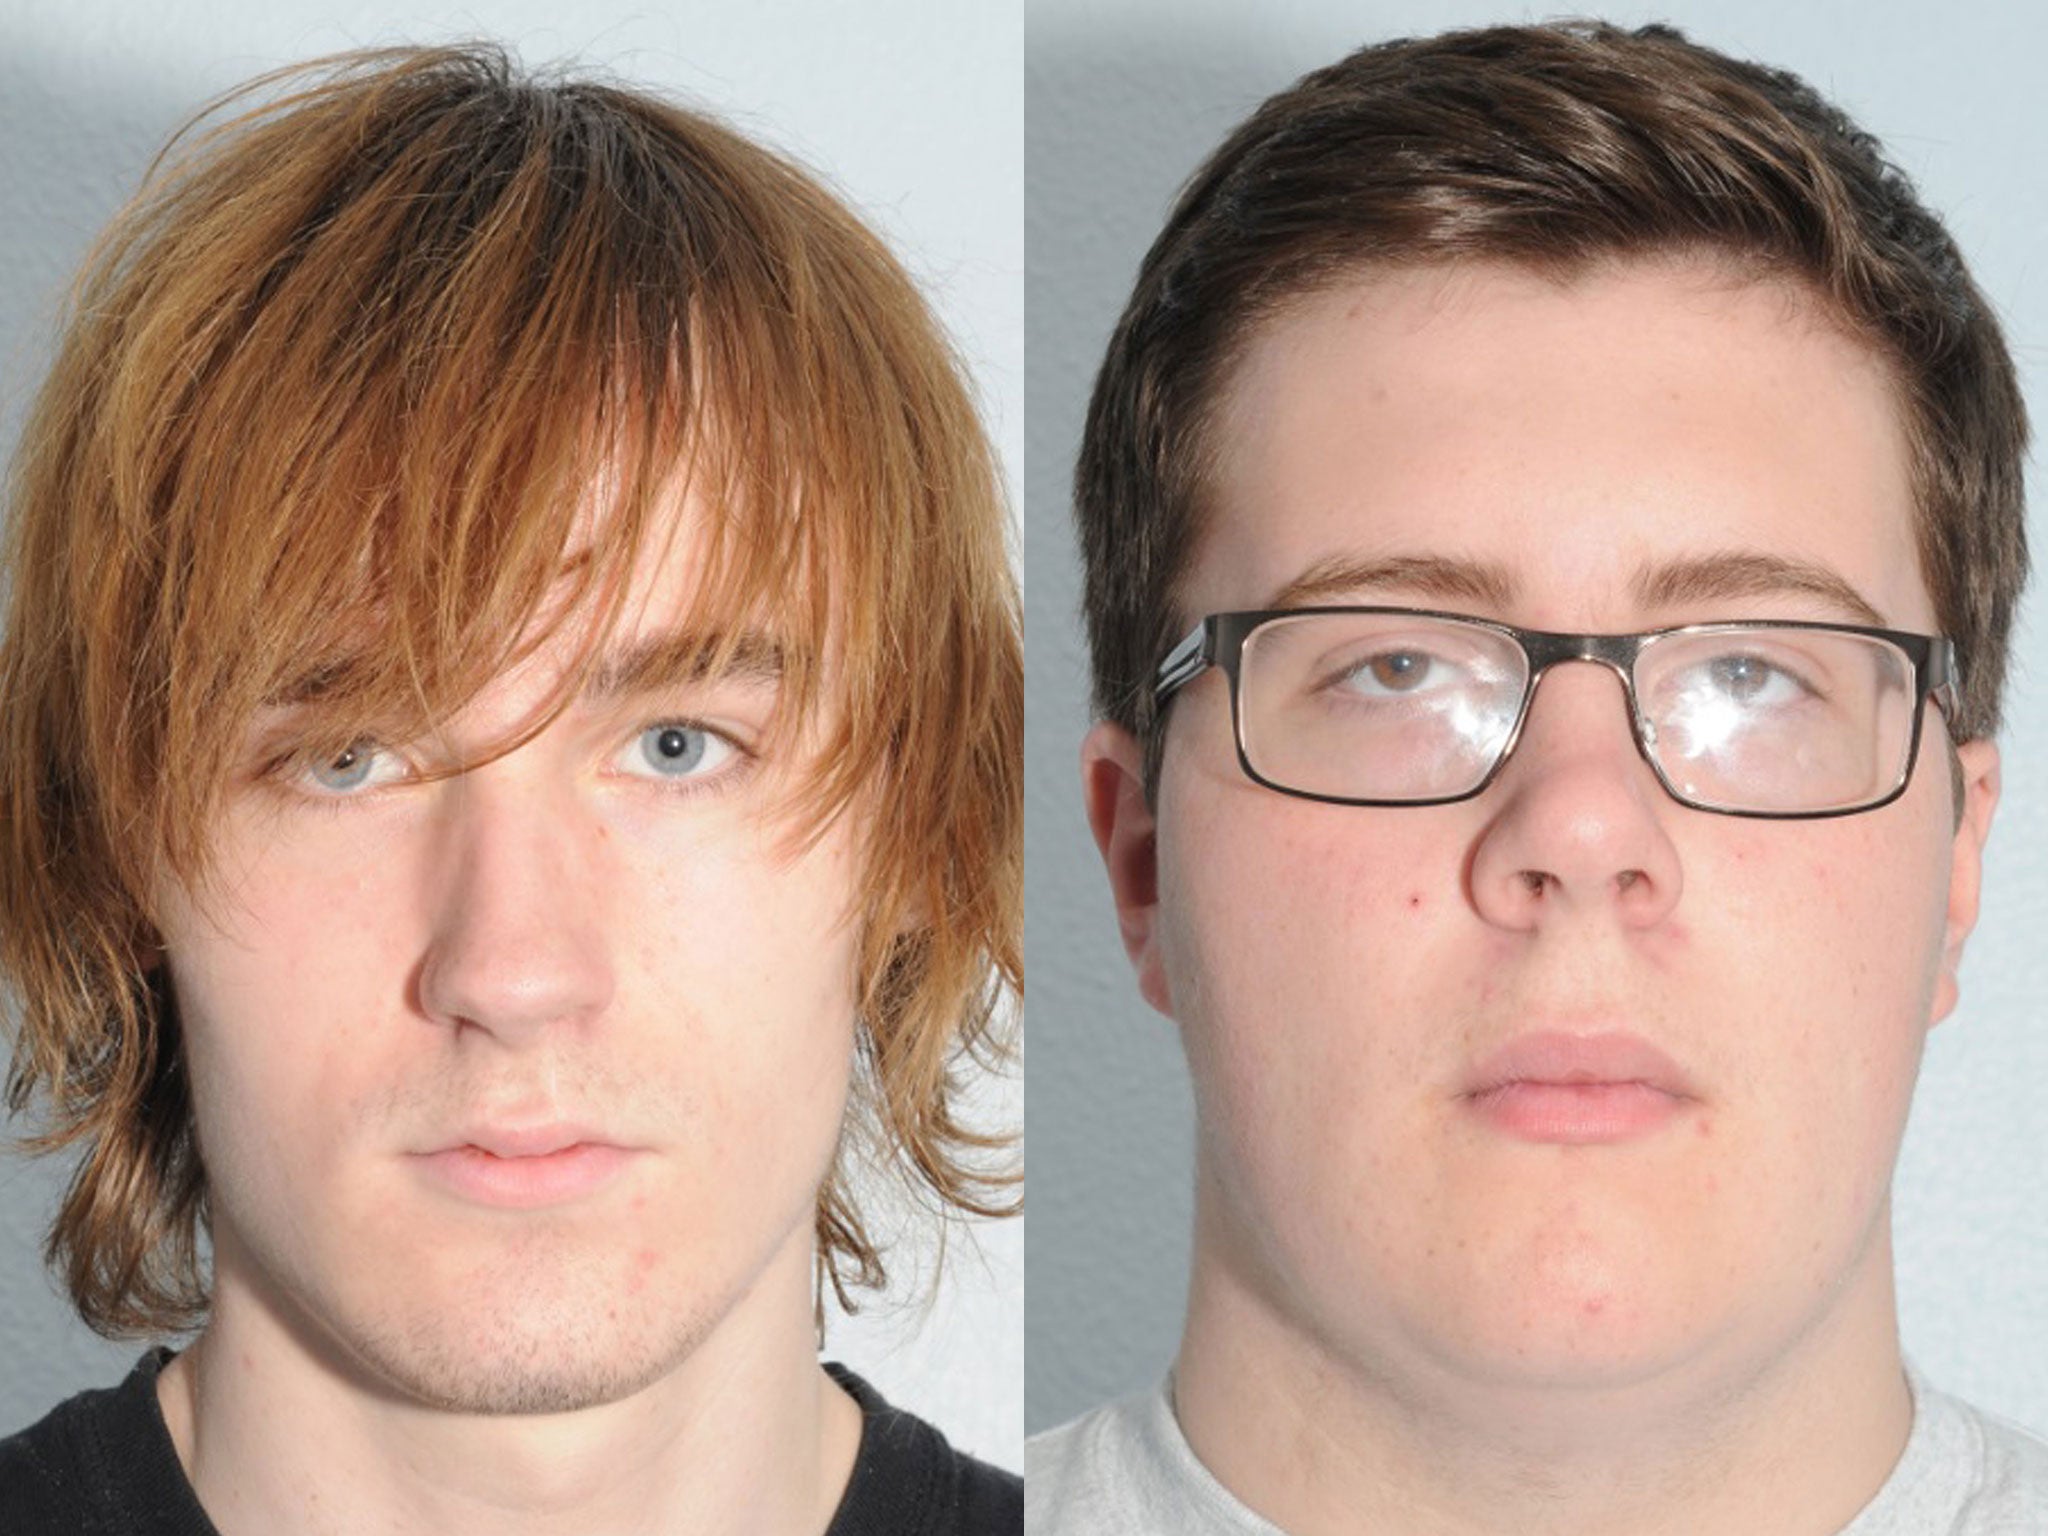 Thomas Wyllie and Alex Bolland, both 15, were jailed for planning a Columbine-style attack at their school in Yorkshire